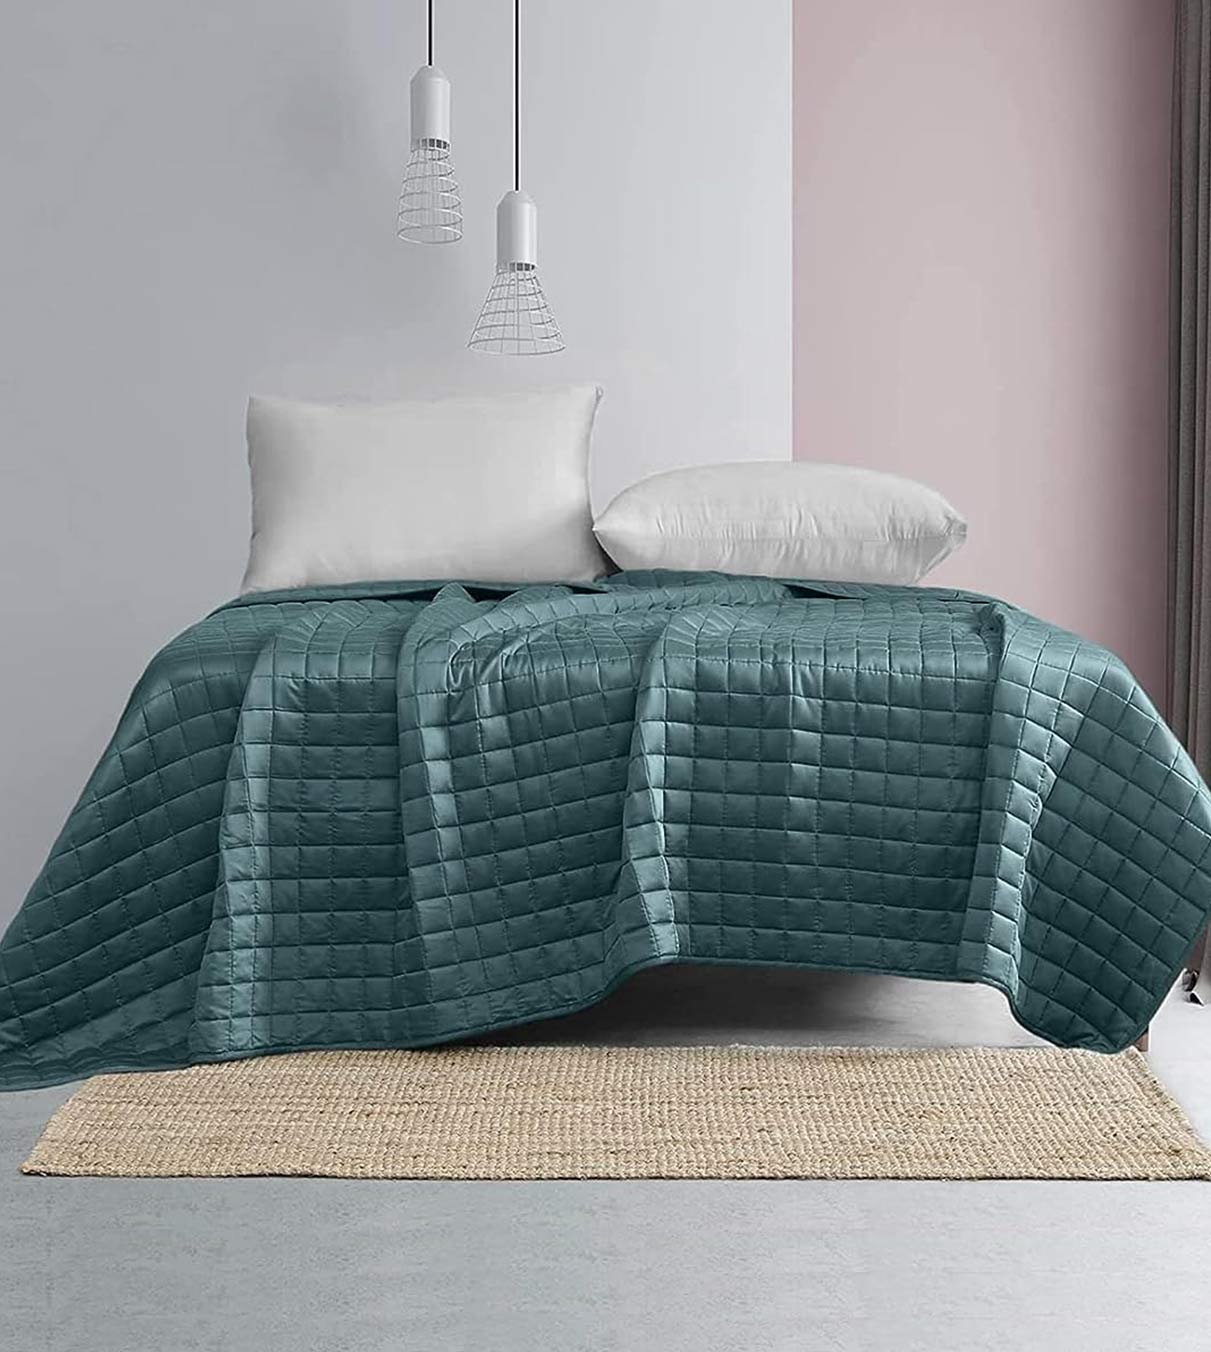 Product: 12lb Weighted Blanket | Color: Bamboo Fresh Mint 3.0